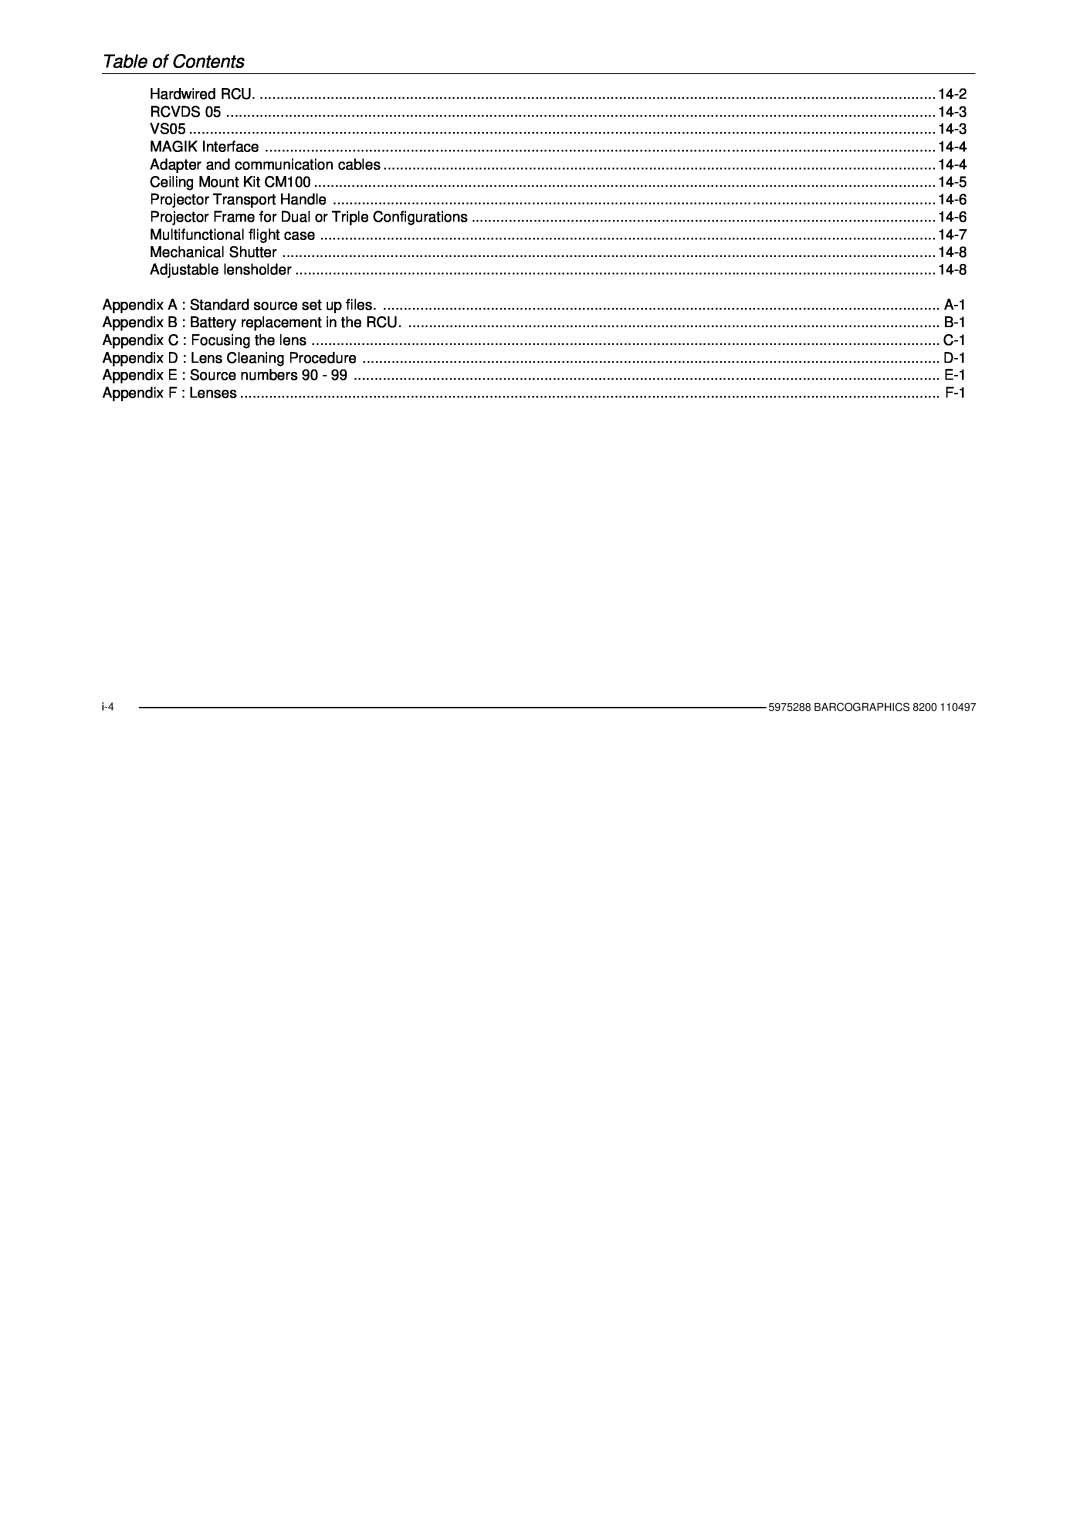 Barco R9001330 owner manual Table of Contents, Hardwired RCU 